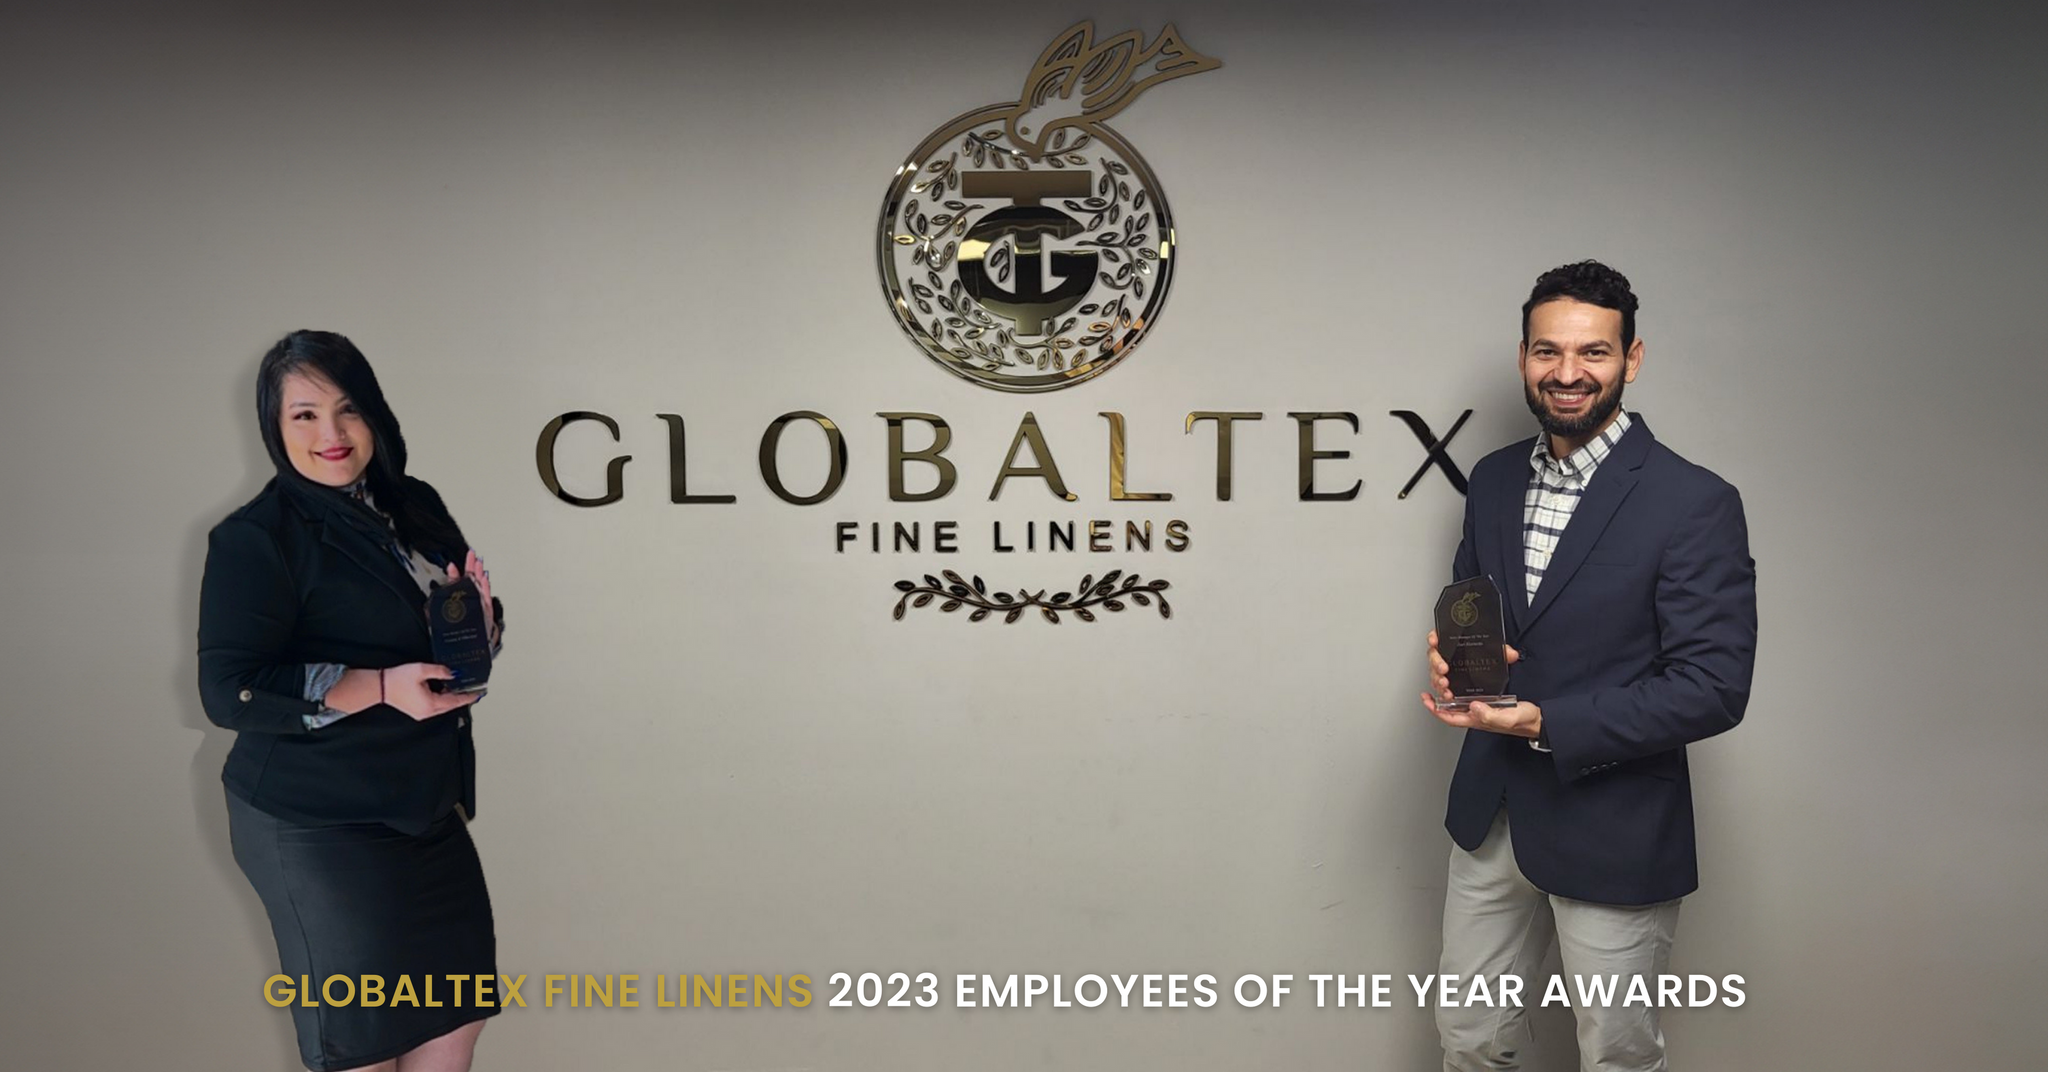 Globaltex Fine Linens Announces Winners of the 2023 Employees of the Year Awards